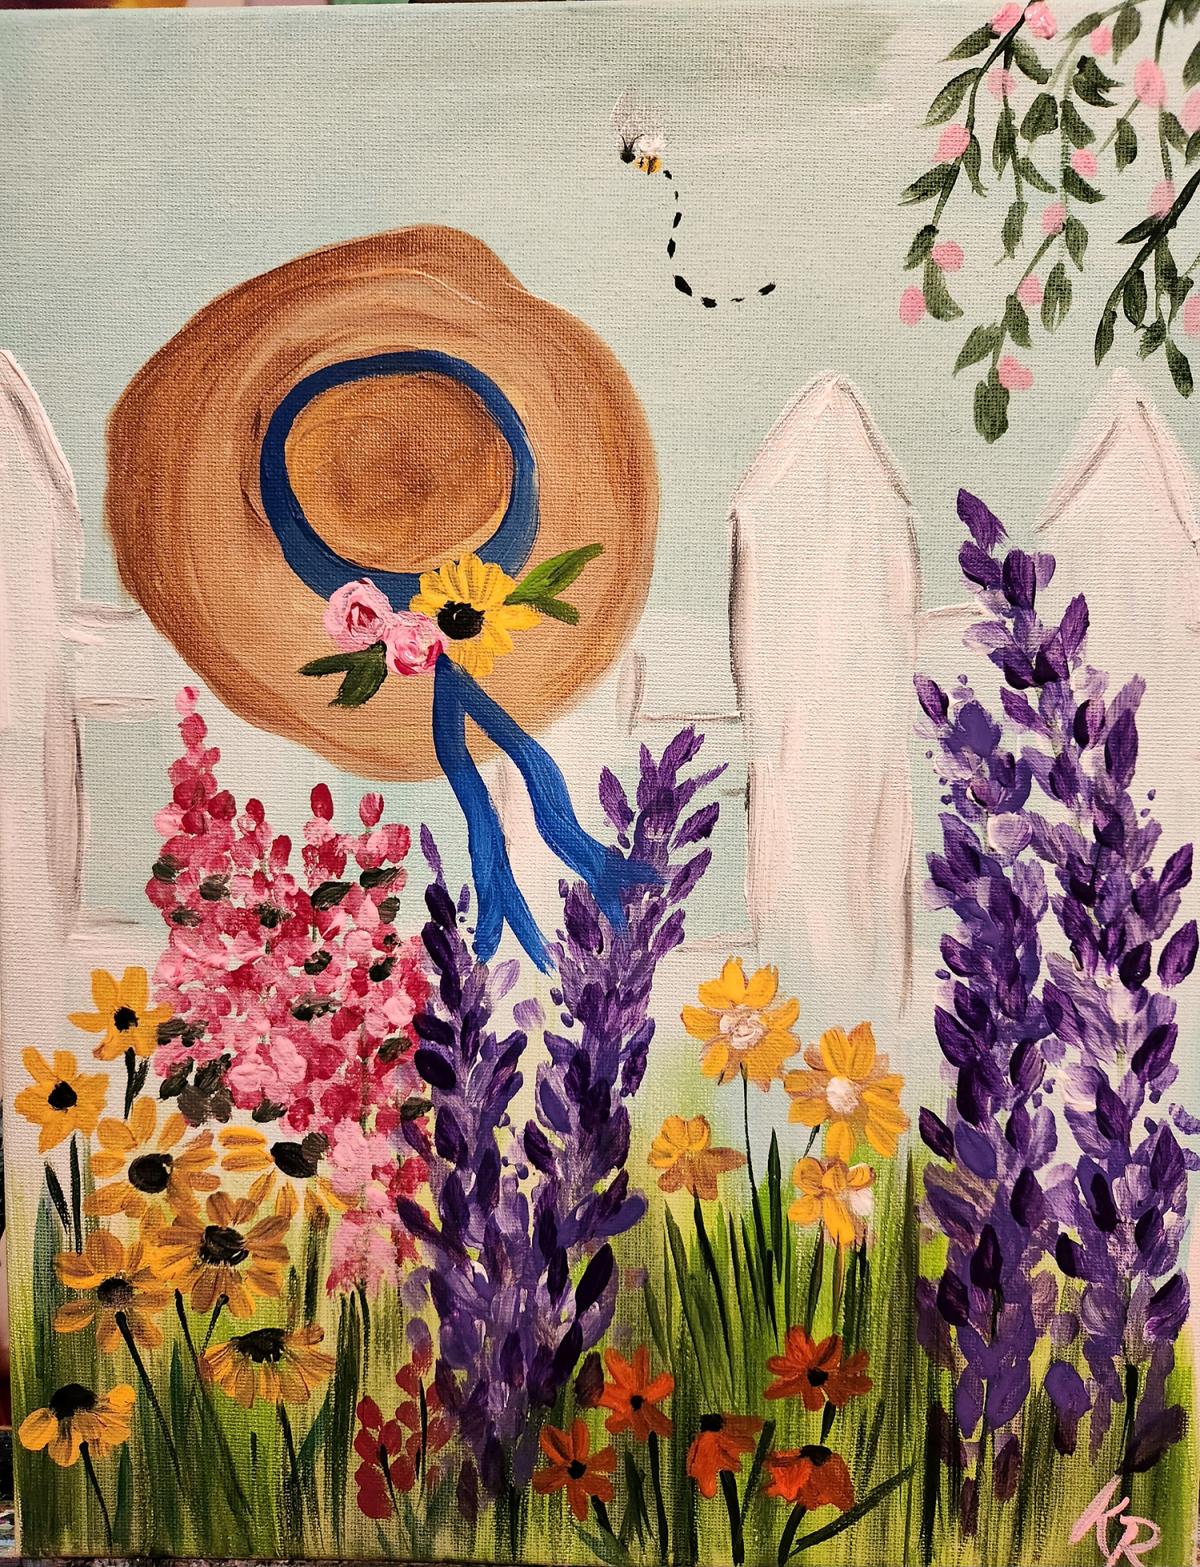 Image of an acrylic painting with flowers and a straw hat with a ribbon hanging on a fence.